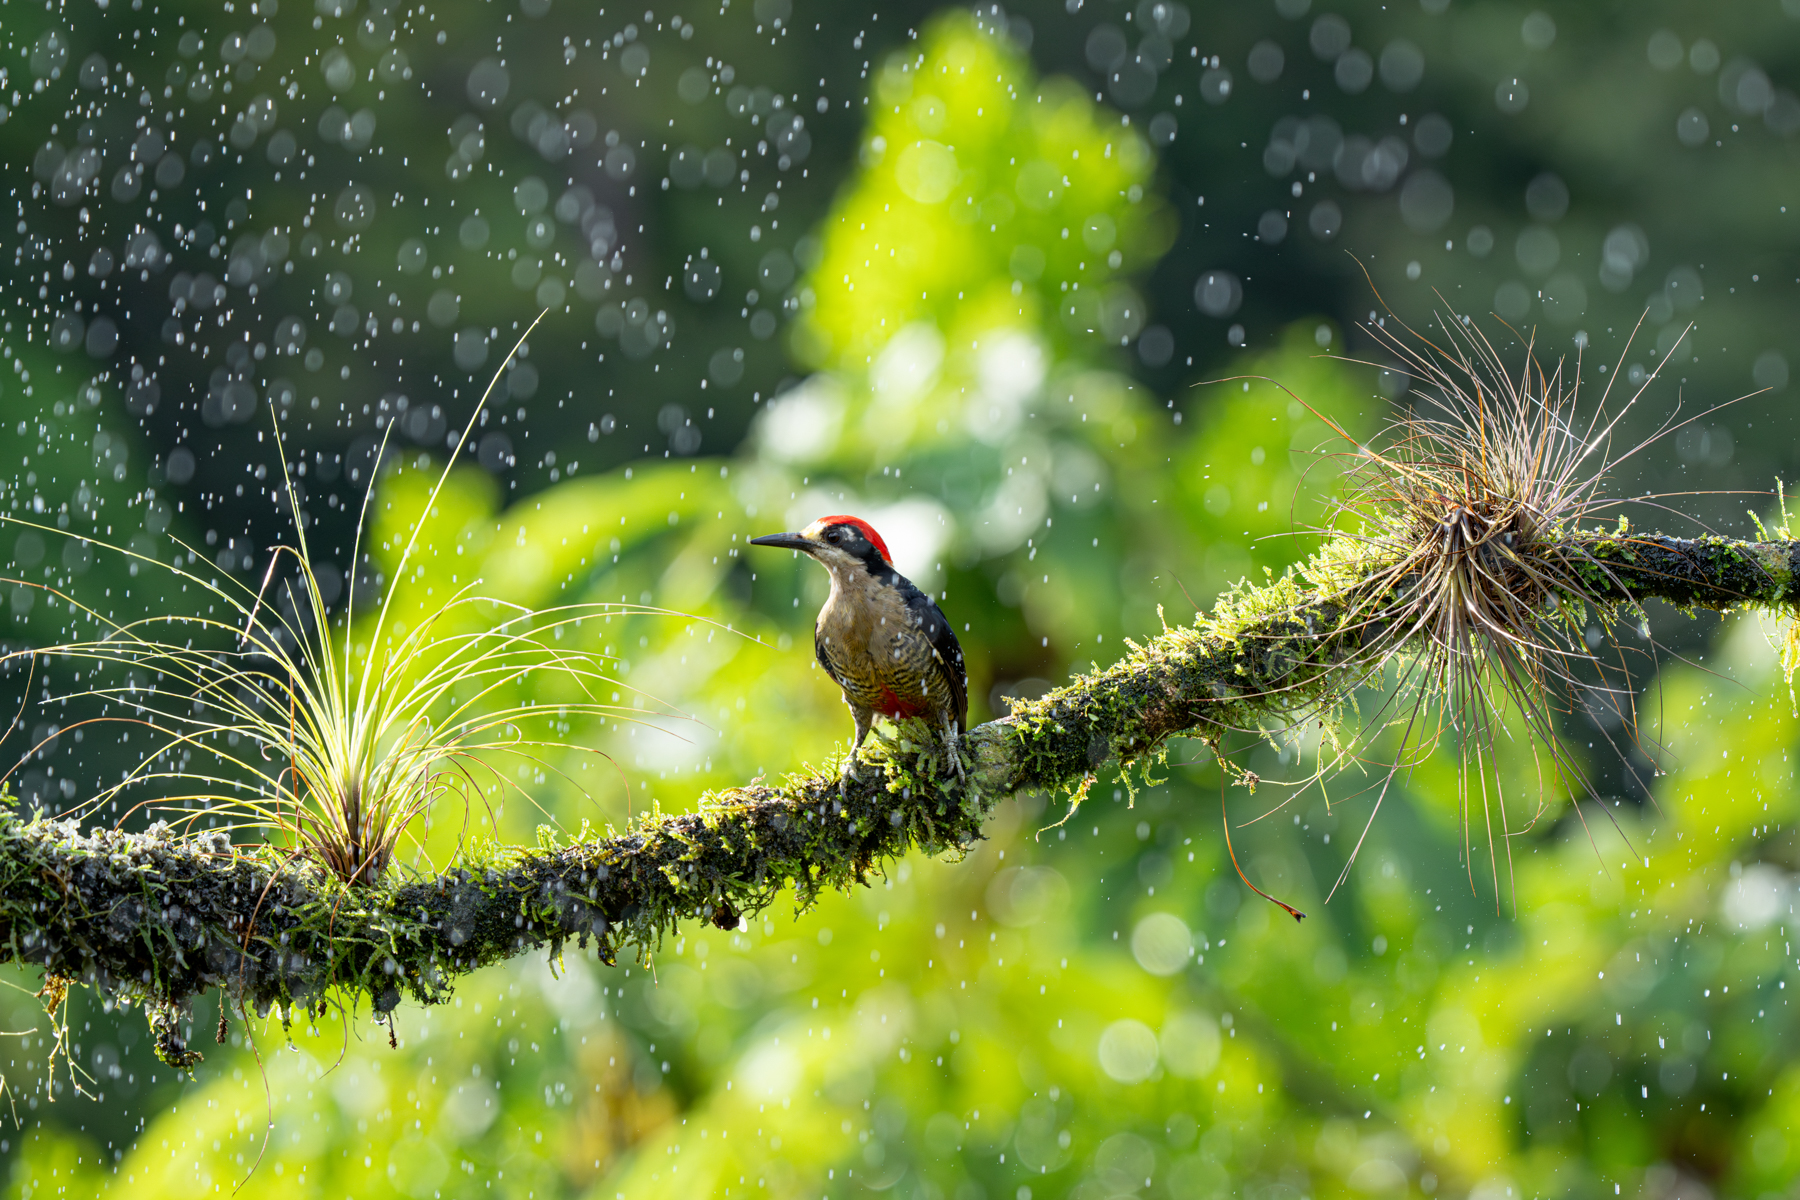 A Black-cheeked Woodpecker enjoys the relief of rain in the Costa Rican heat (image by Inger Vandyke)